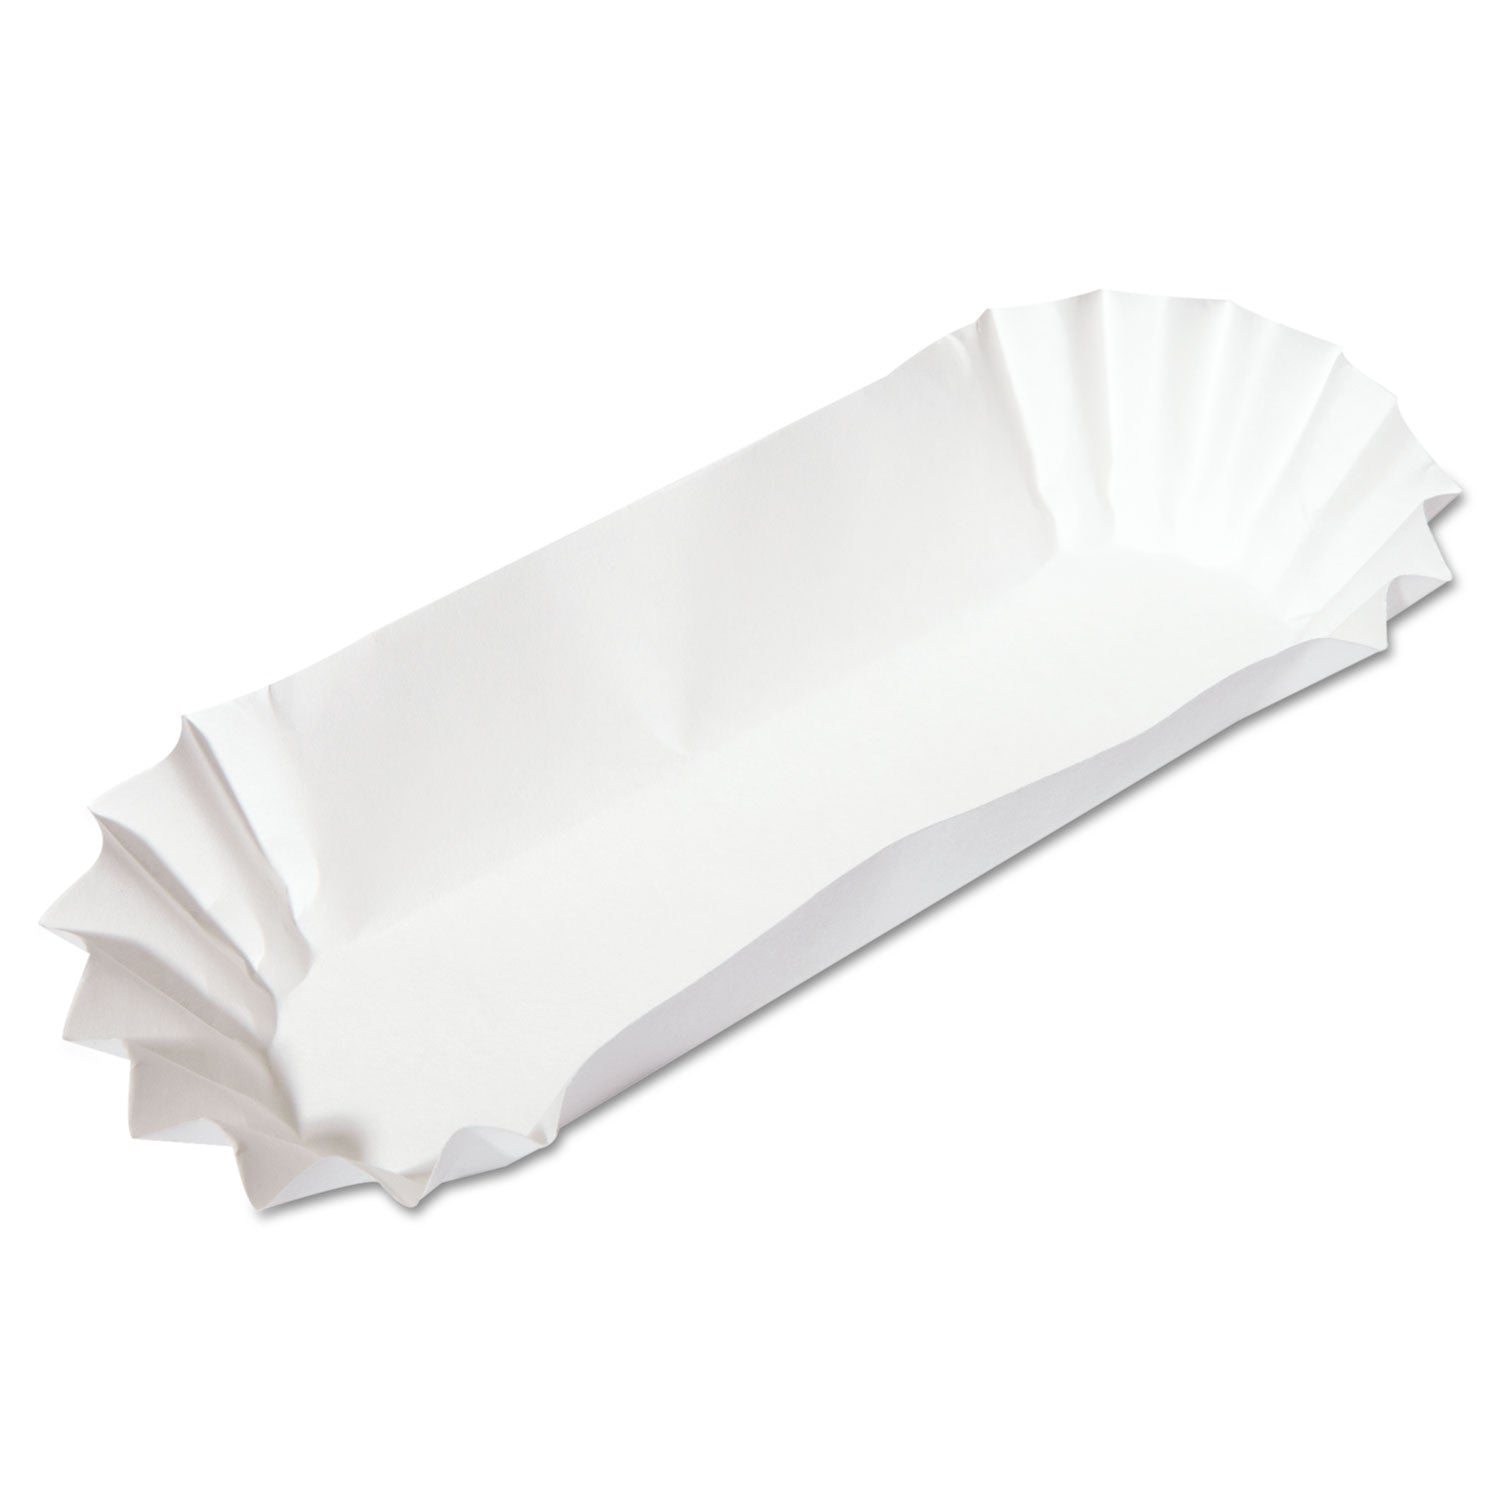 Fluted Hot Dog Trays, 6 x 2 x 2, White, Paper, 500/Sleeve, 6 Sleeves/Carton - 